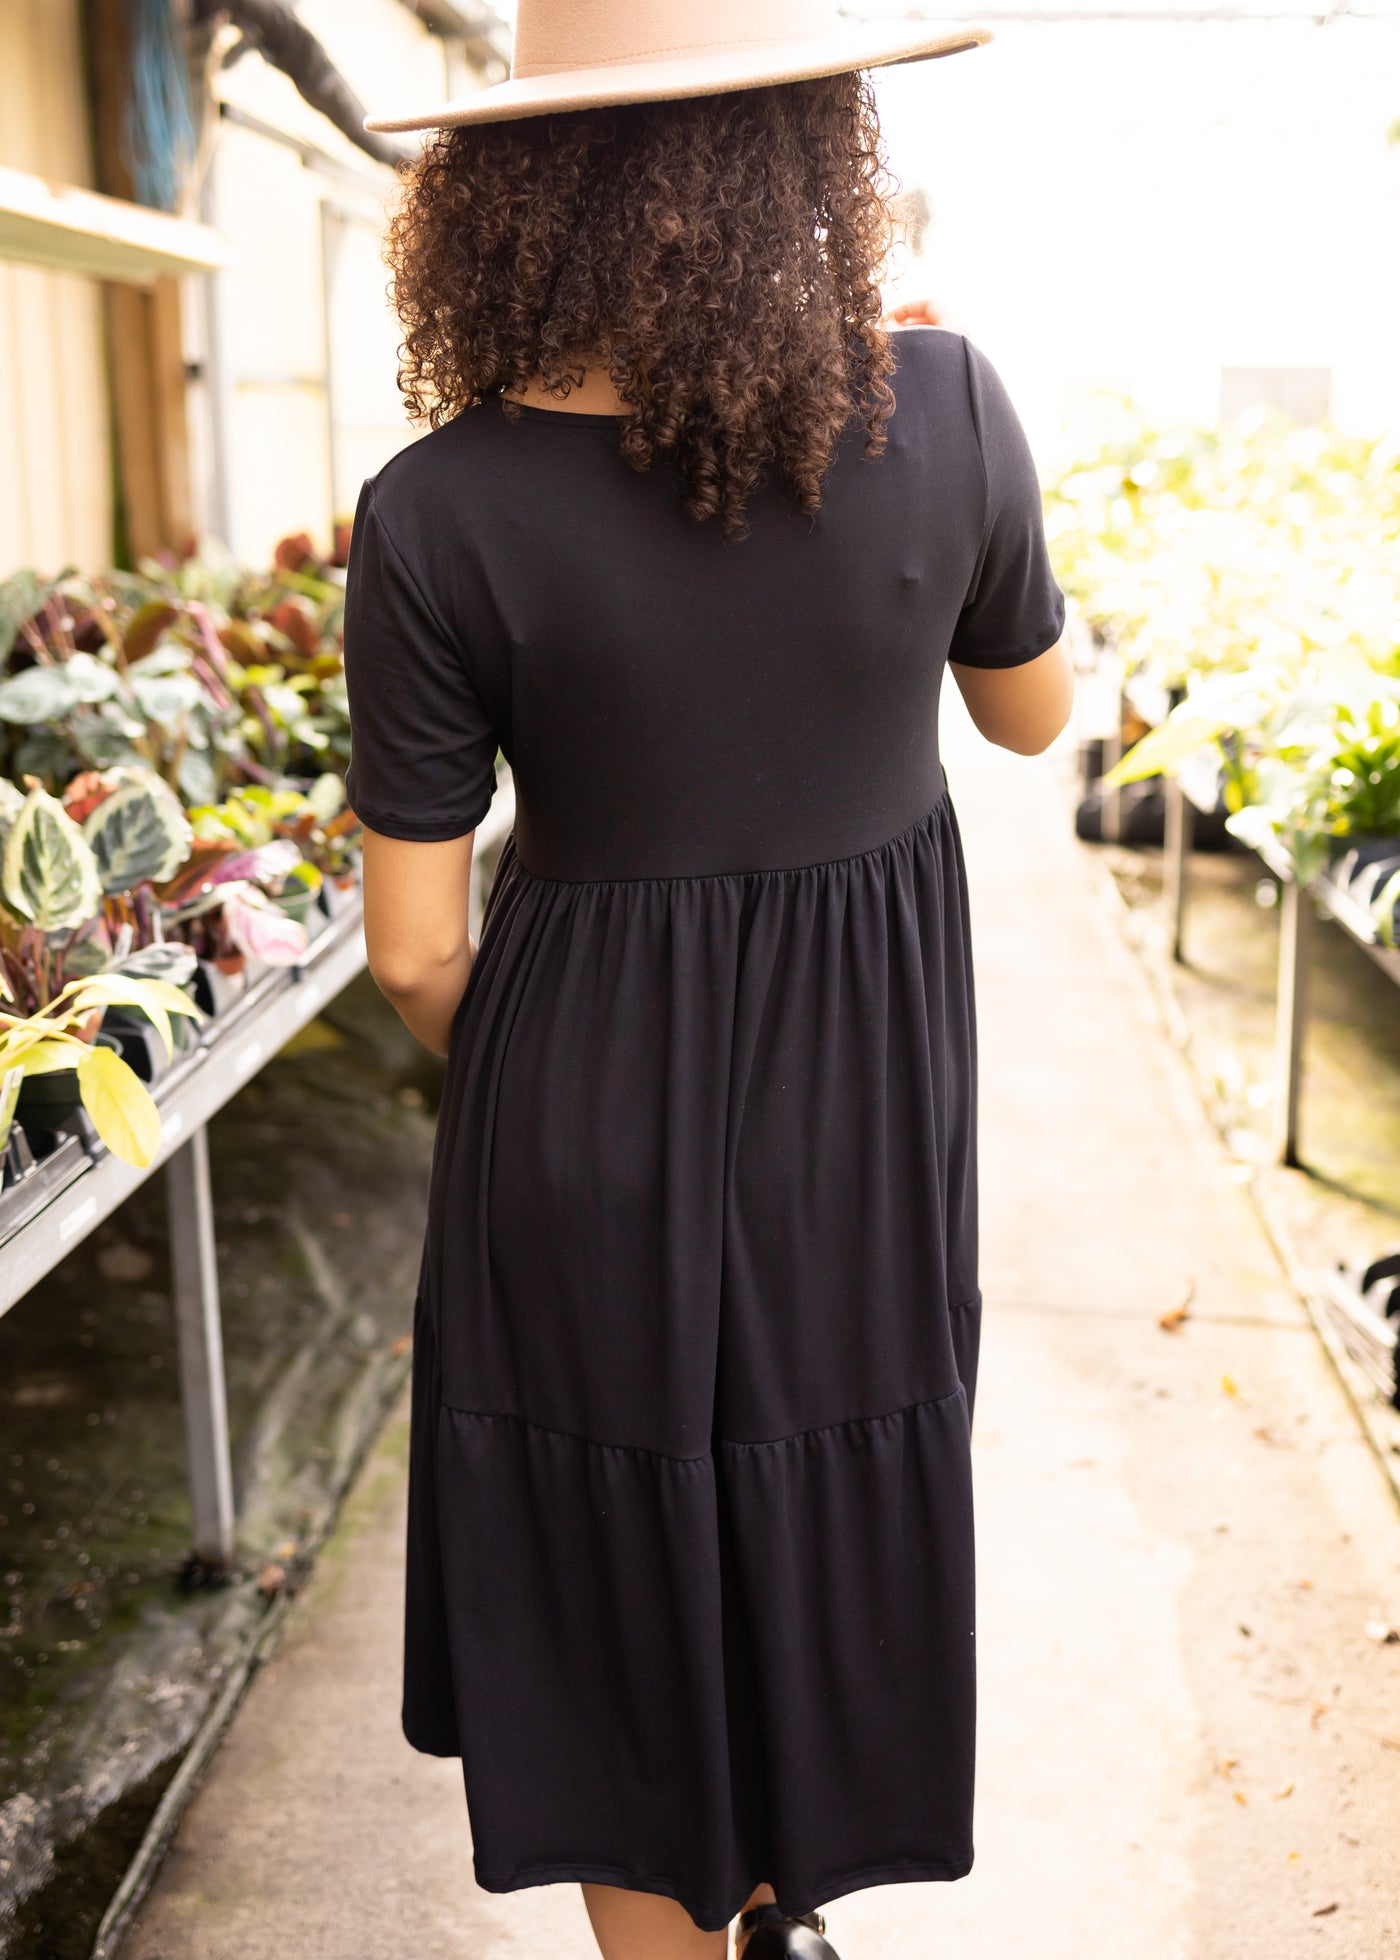 Back view of a short sleeve knit black dress